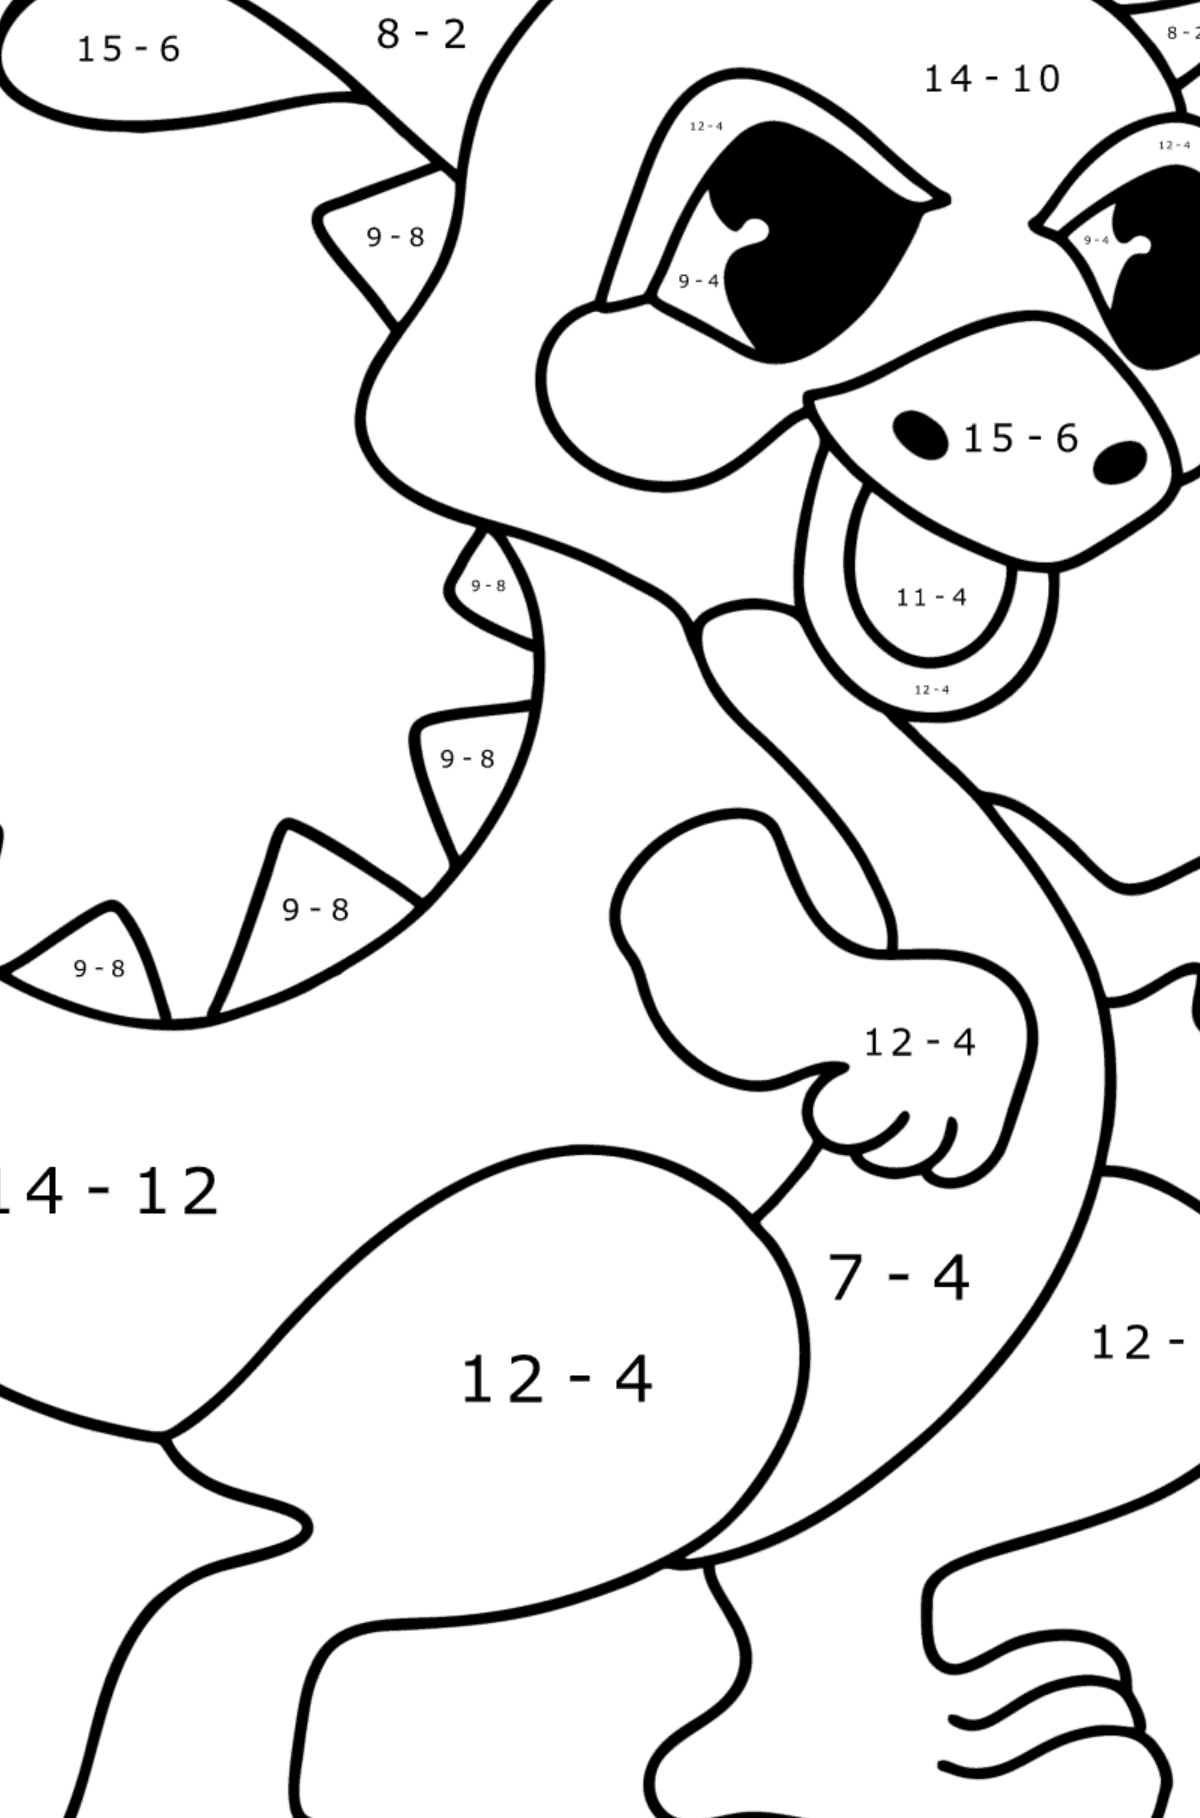 Cartoon dragon coloring page - Math Coloring - Subtraction for Kids